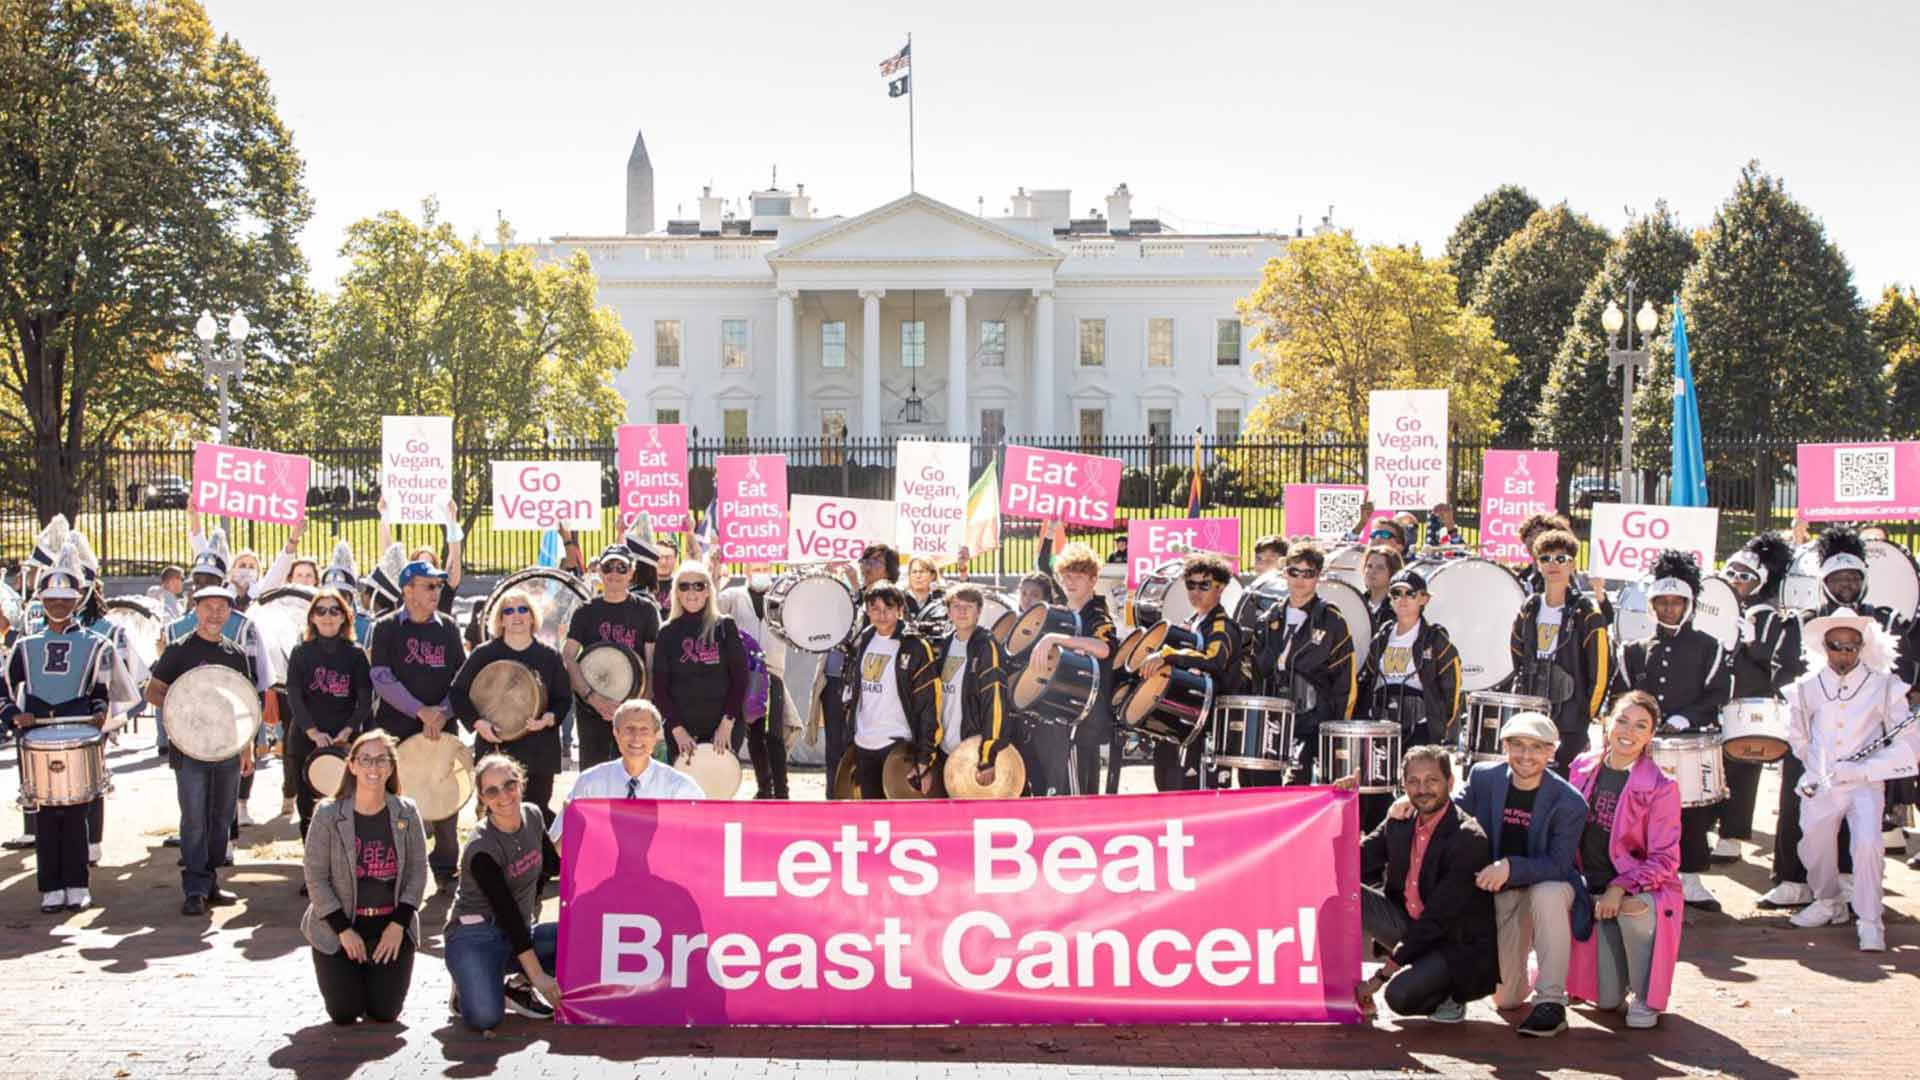 A large group of doctors and survivors, many wearing pink, standing in front of the White House fence with drums and holding a large banner that says Let's Beat Breast Cancer